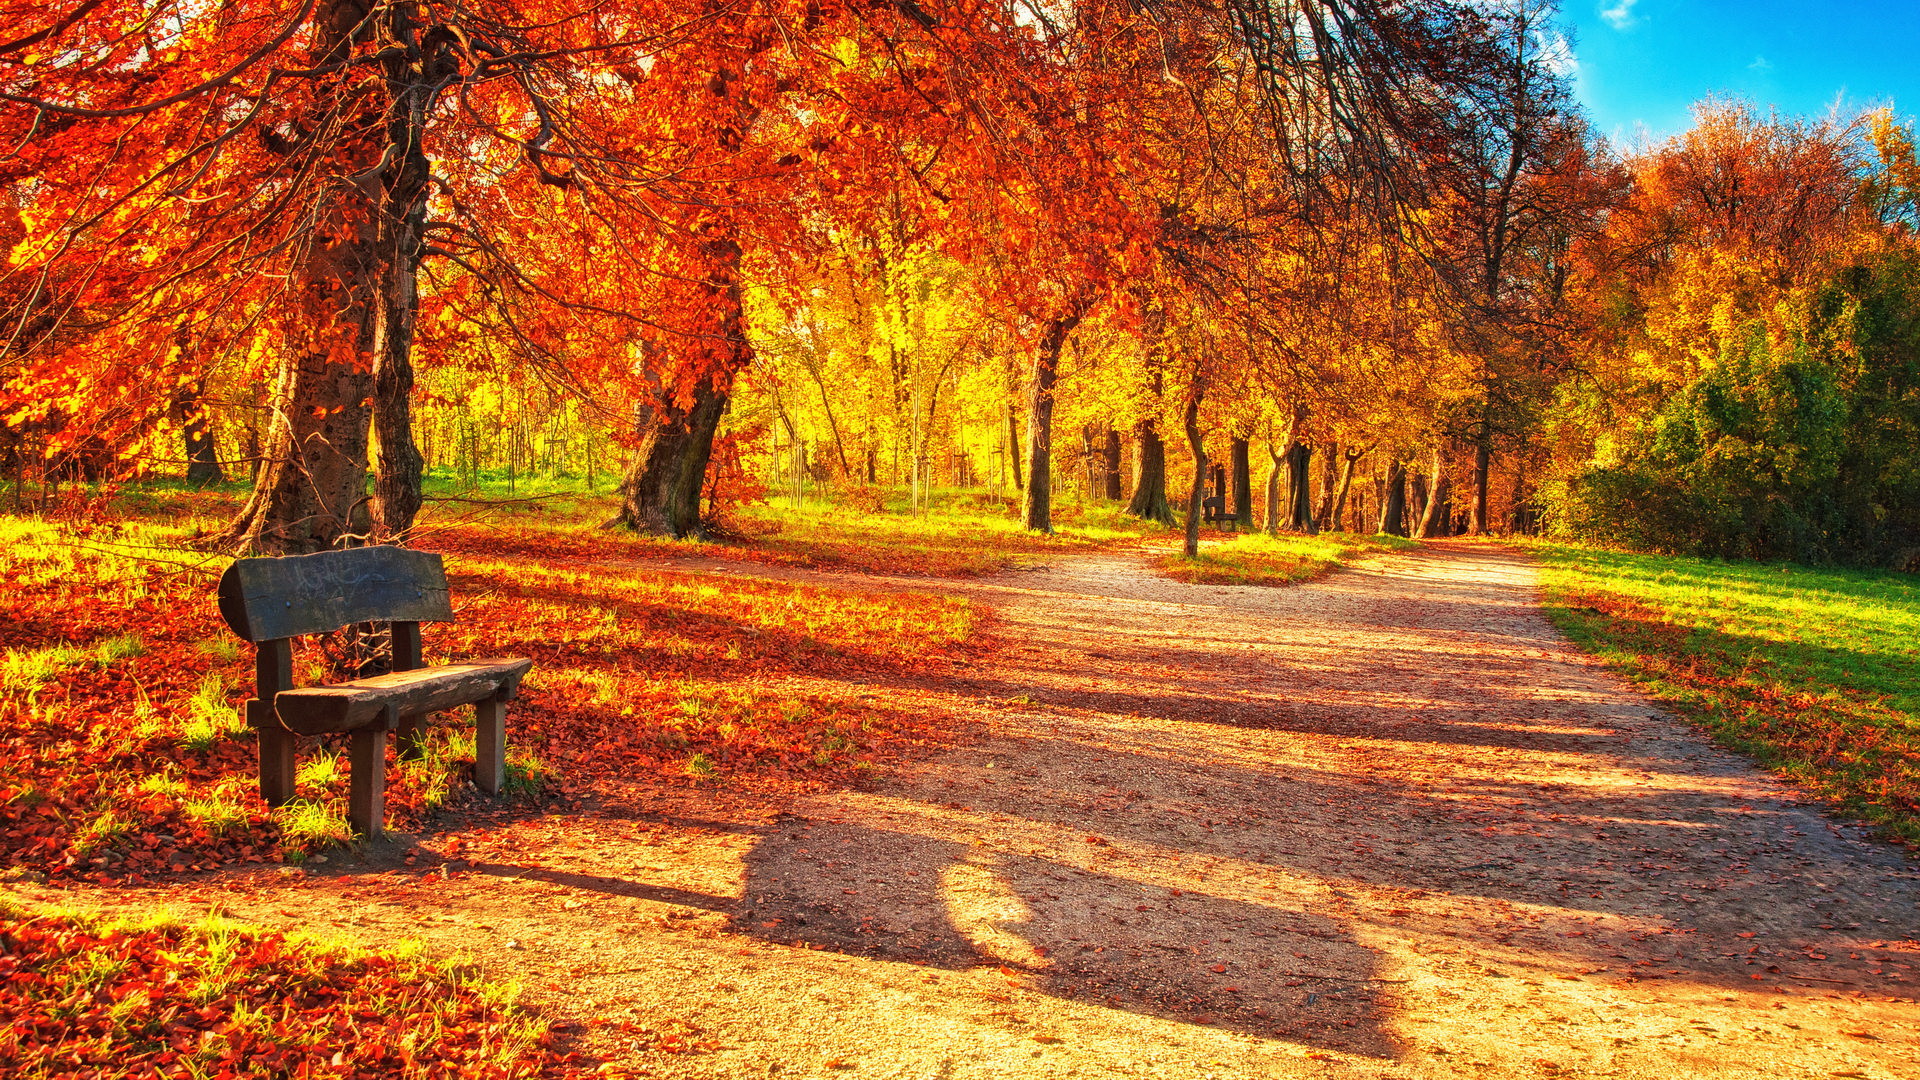 1920x1080 Autumn Leaves Desktop Background Wallpaper High Resolution Wallpapers   px 1.19 MB